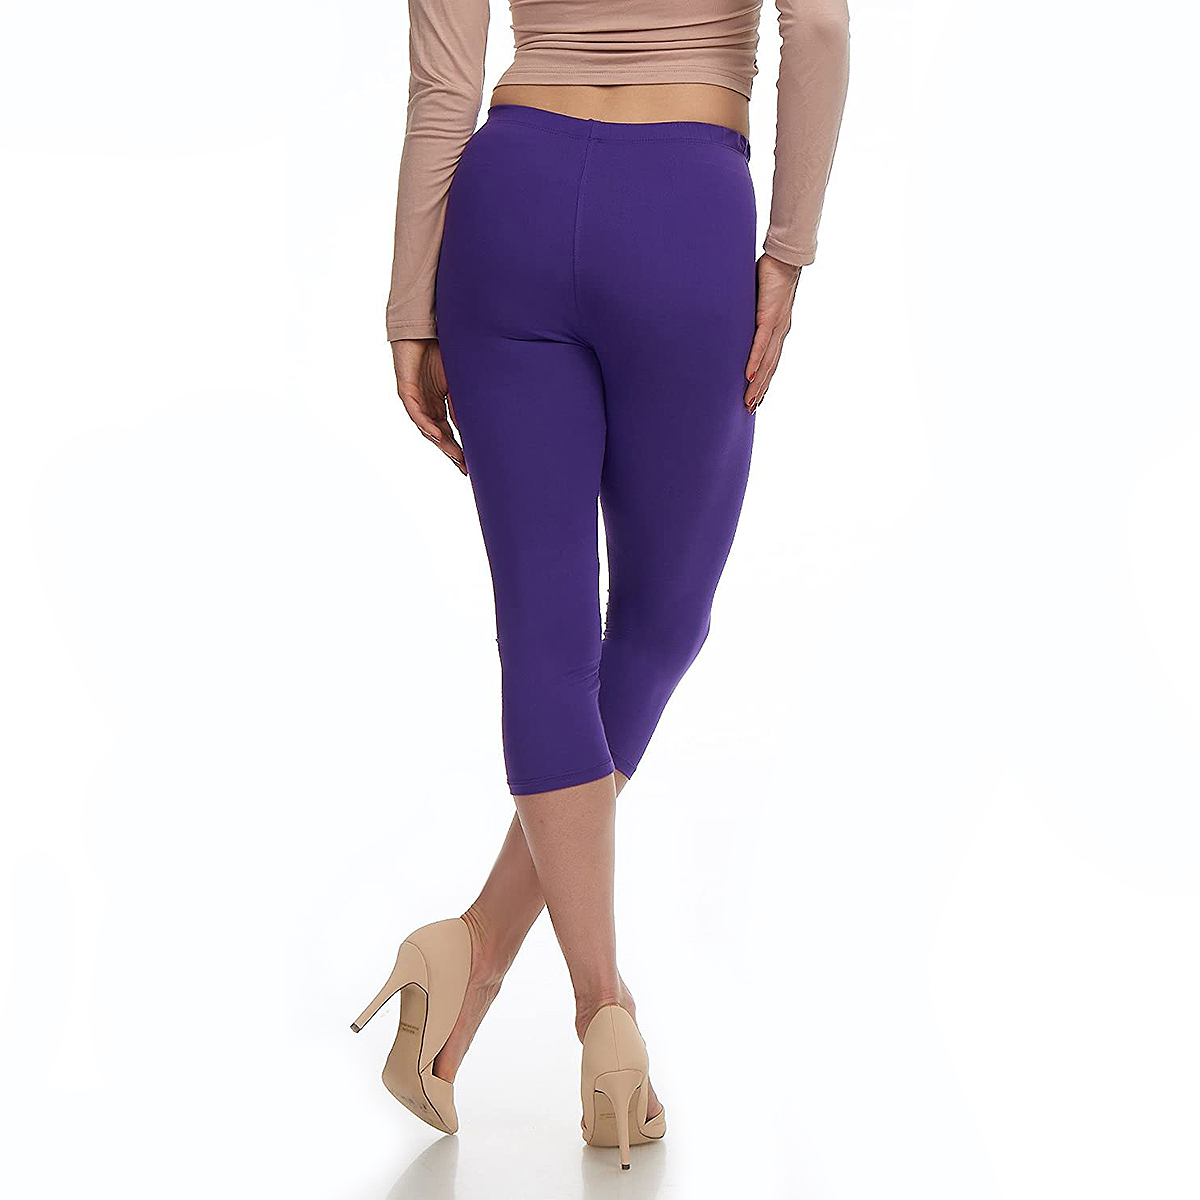 Amazon Shoppers Love The Iuga High Waist Leggings, And They're On Sale